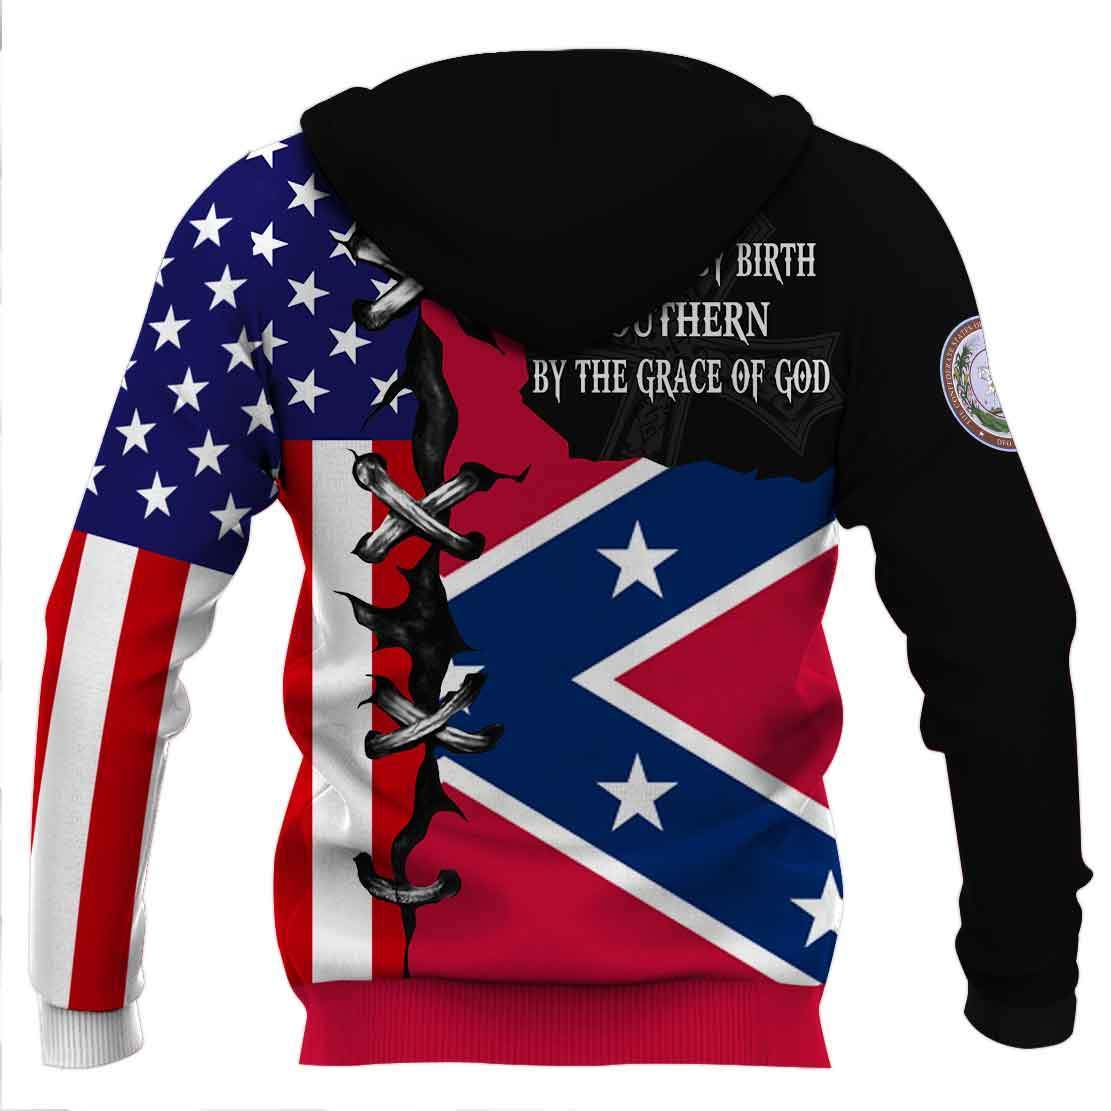 American by birth southern by the grace of god full printing shirtAmerican by birth southern by the grace of god full printing hoodie - back 1